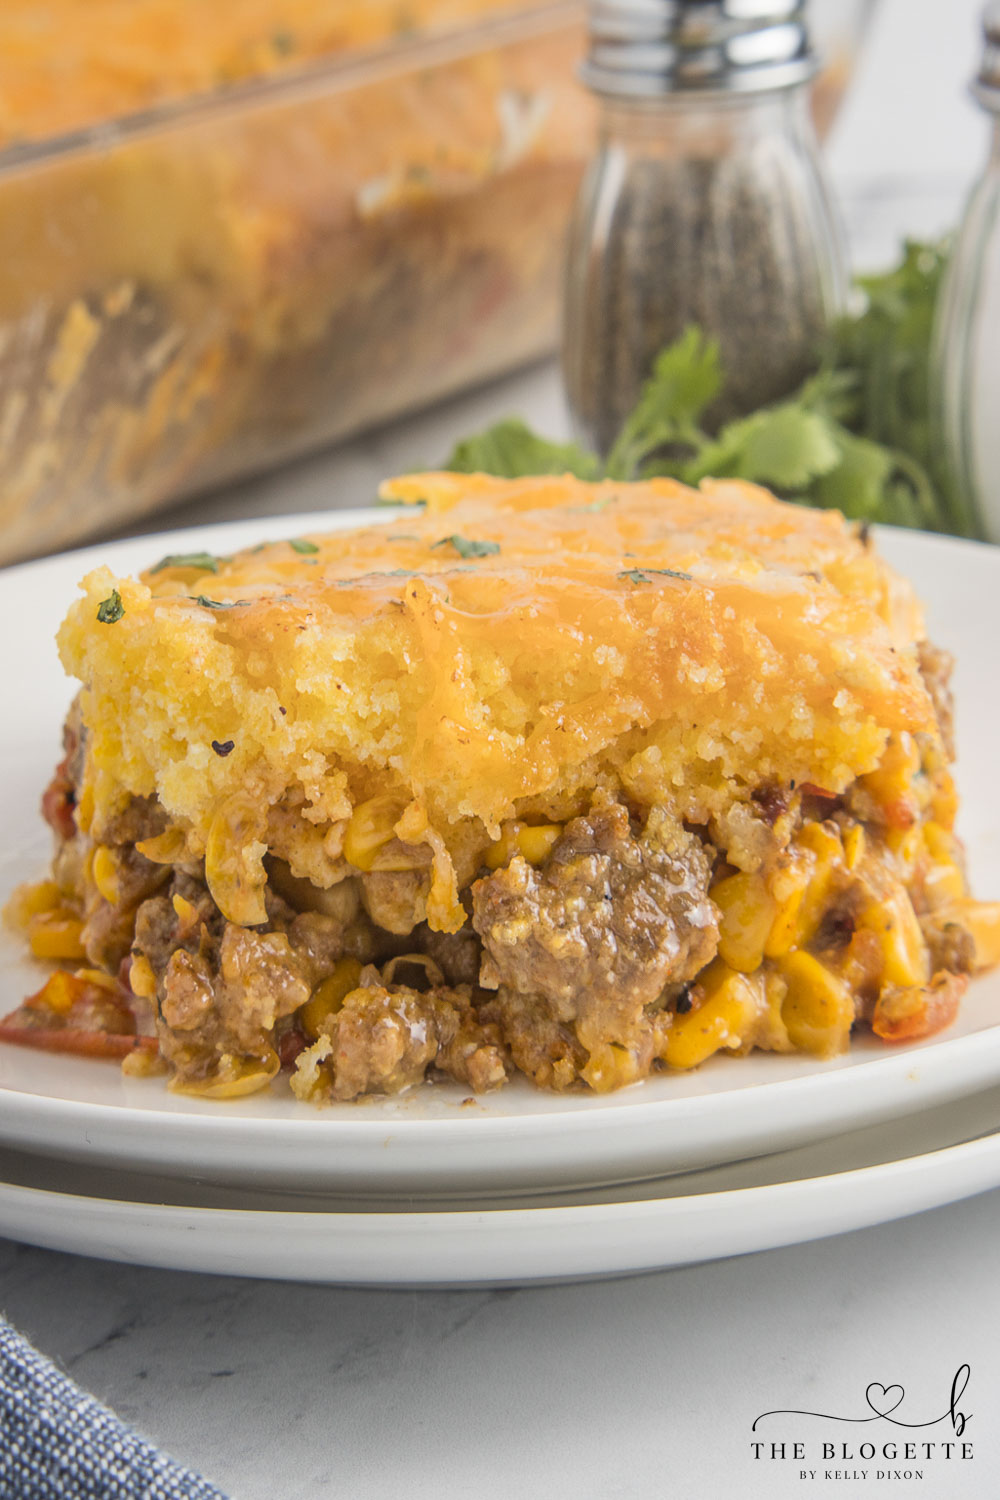 This Mexican Cornbread Casserole is an easy and delicious one-dish meal made with ground beef, Rotel, corn, cheese, and Jiffy cornbread mix.